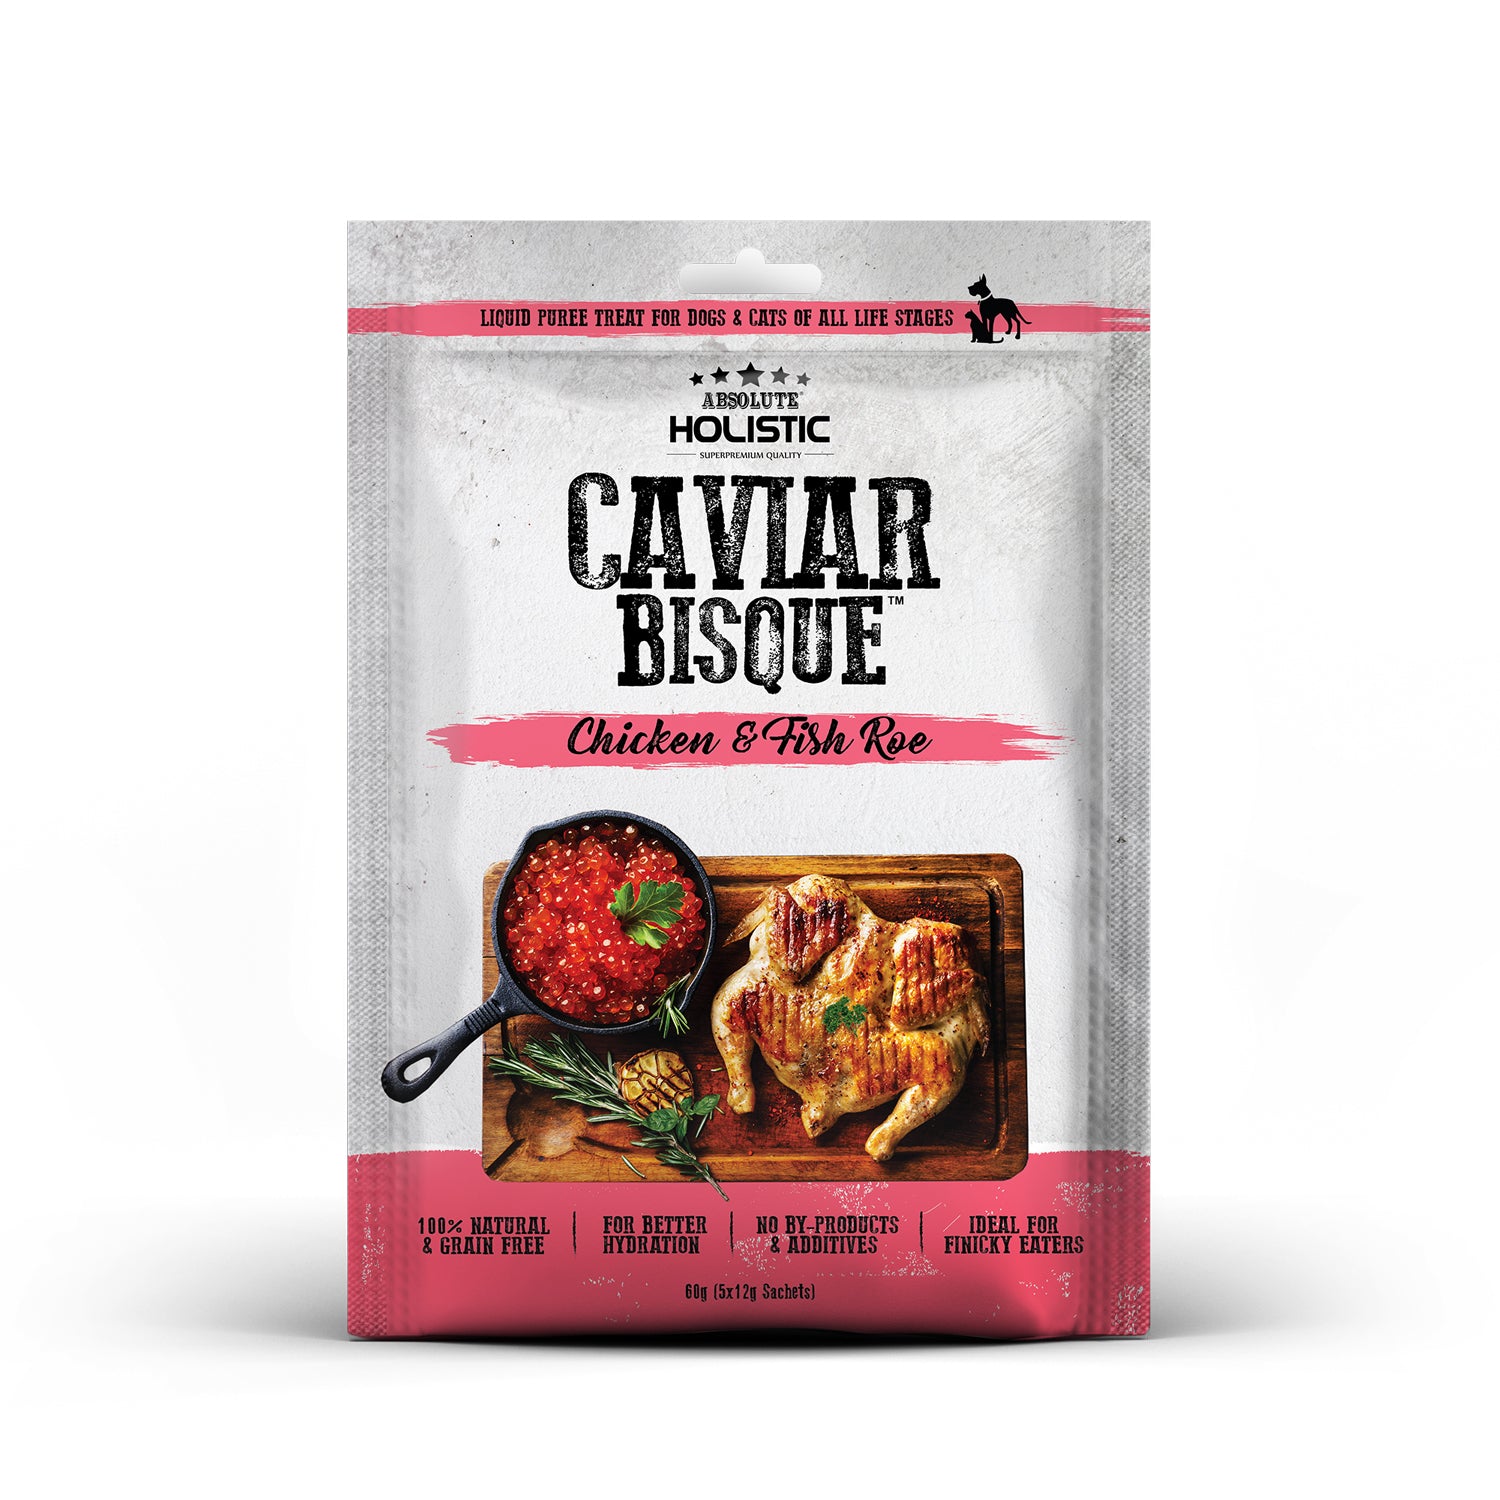 Absolute Holistic Natural Cat & Dog Treats Caviar Bisque Chicken & Fish Roe 60g front